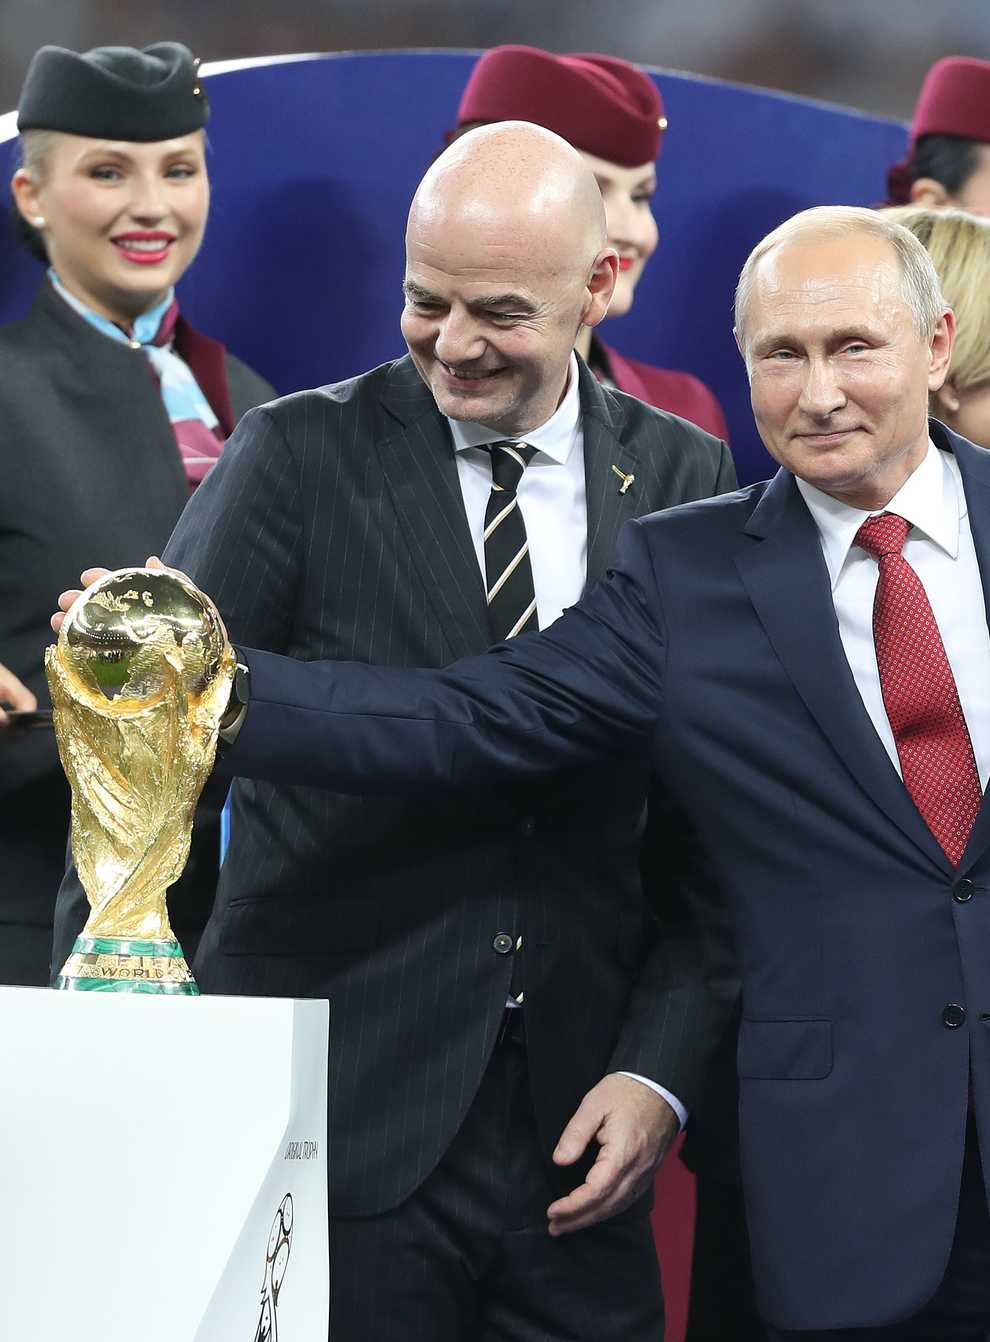 FIFA is facing calls to ban Russia from the World Cup (Owen Humphreys/PA)